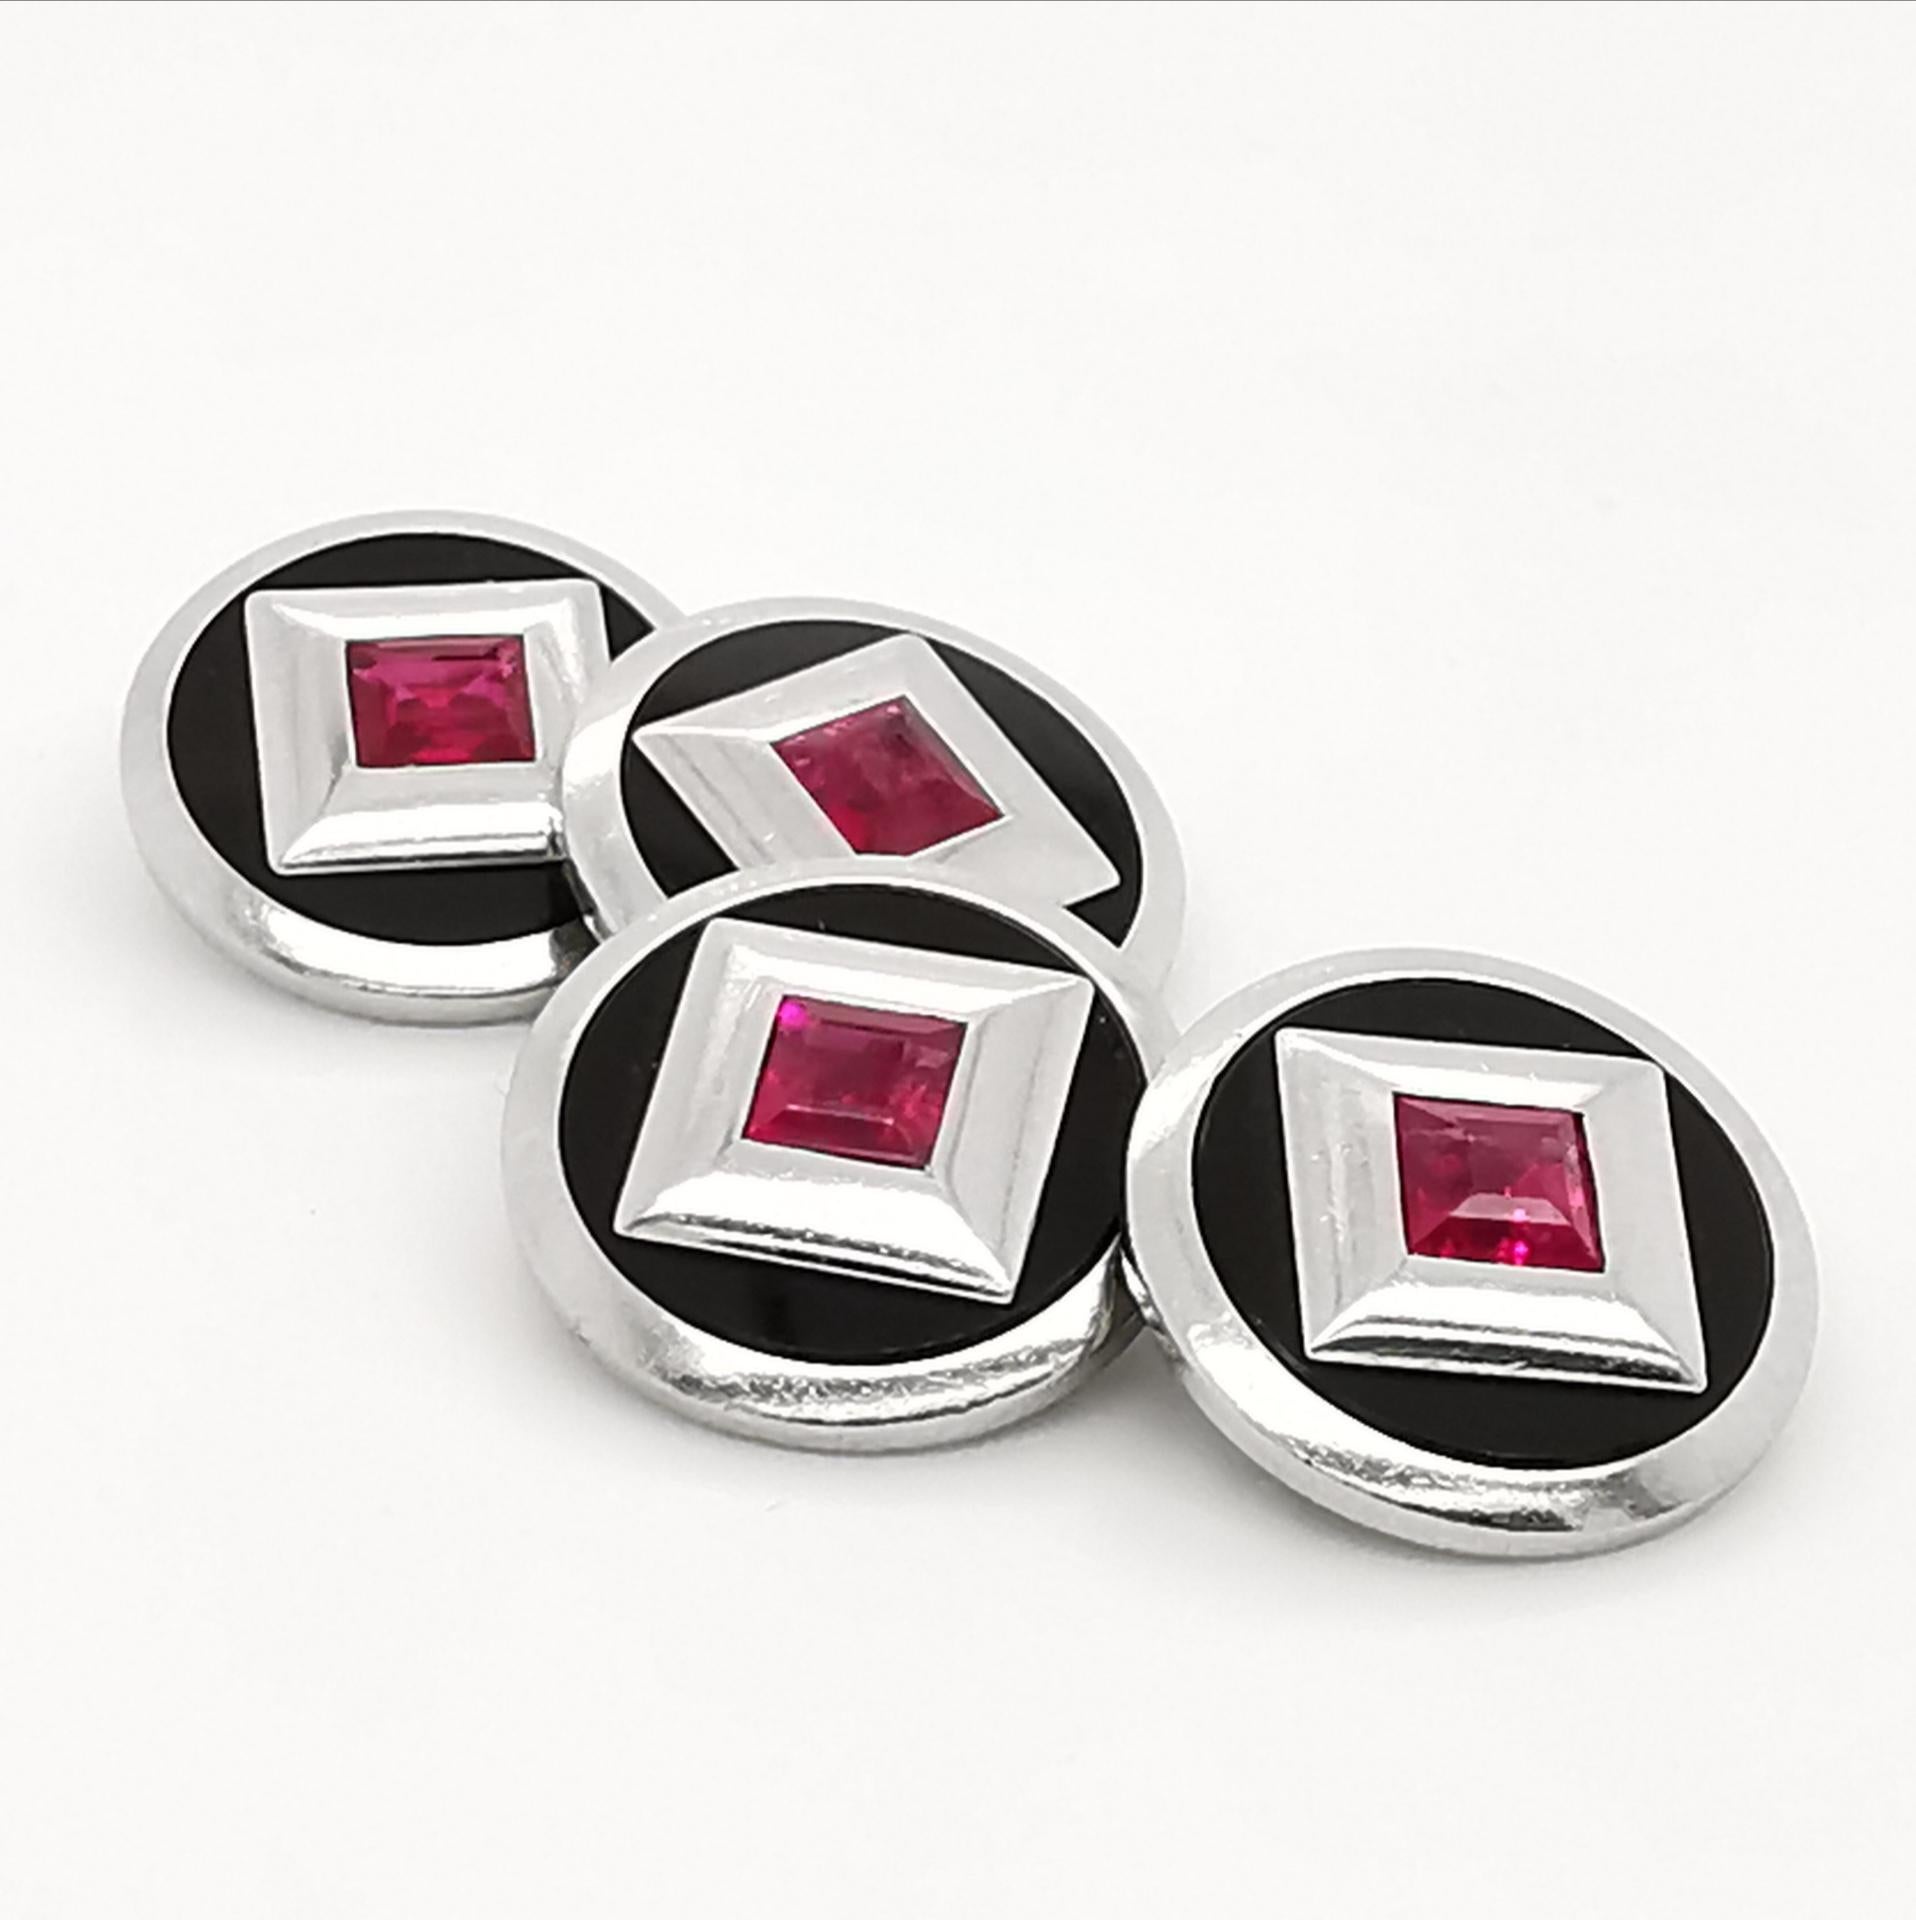 A pair of French, Art Deco, black onyx and ruby cufflinks, mounted in platinum, with square-cut rubies, in heavy, platinum, square settings, within discs of black onyx, in platinum surrounds, with French dog marks for platinum and numbered 25, with